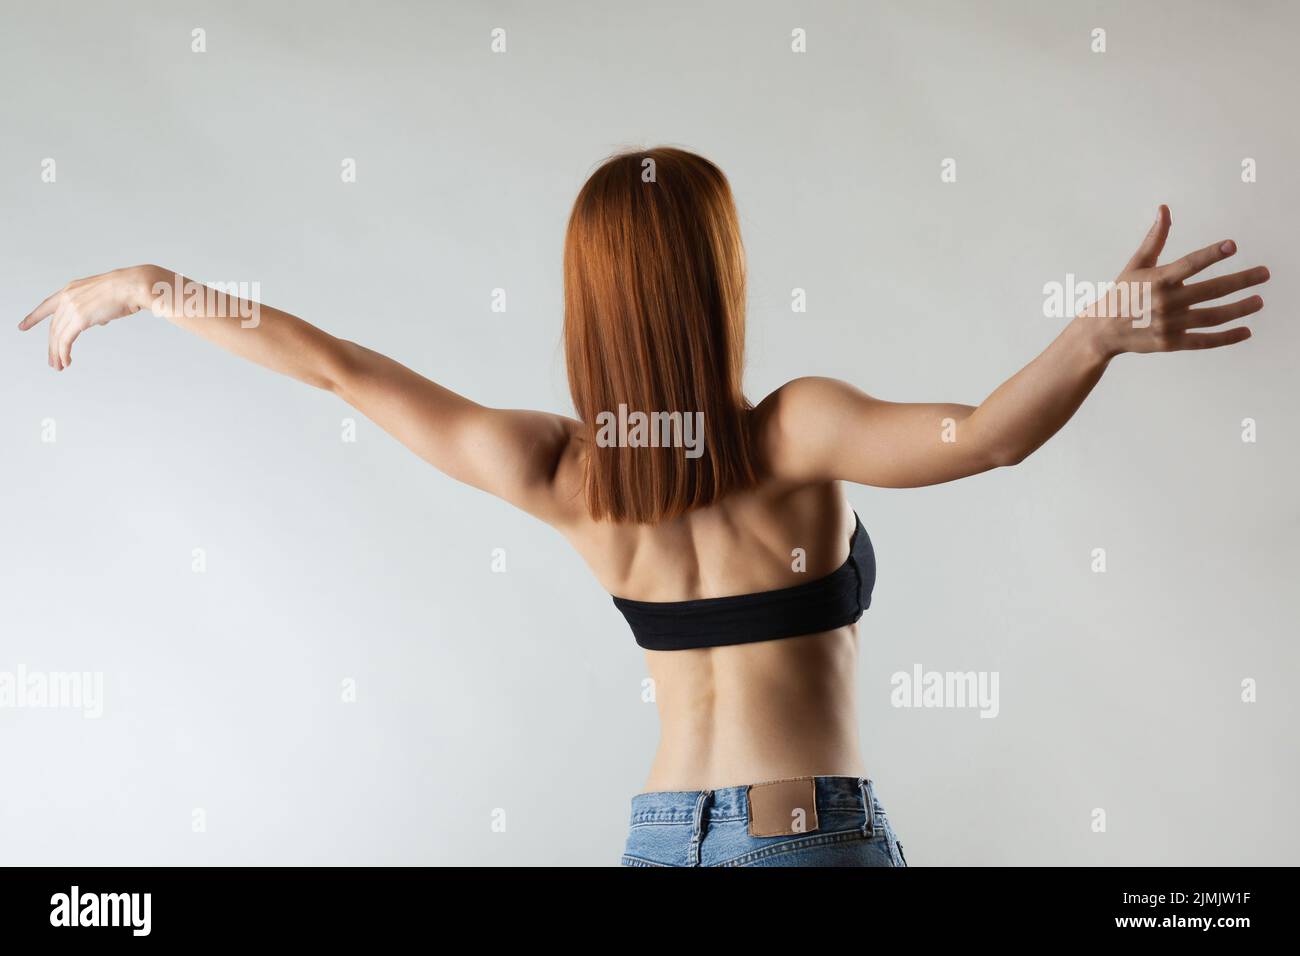 Beautiful girl with burnt orange hair stretching and making ballet pose. Studio portrait on gray background. Stock Photo